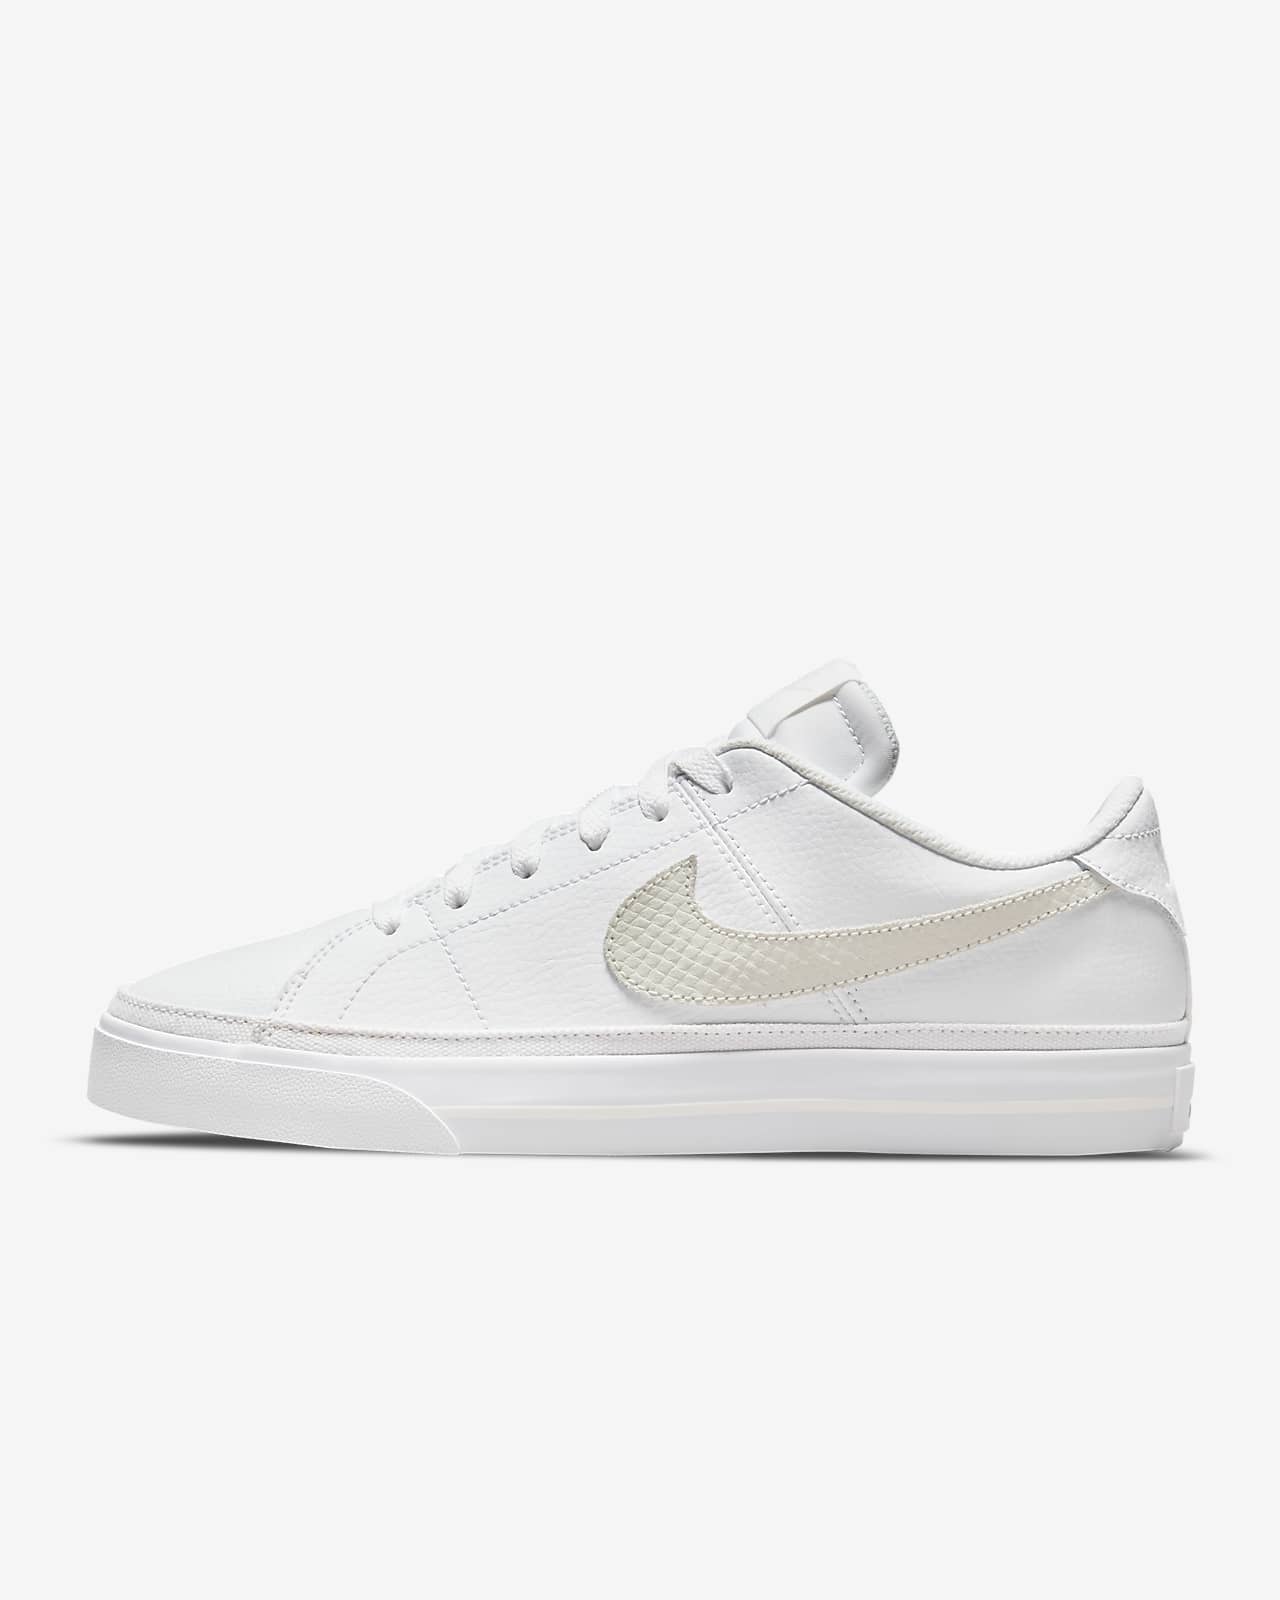 Chaussures Nike Court Legacy pour Femme